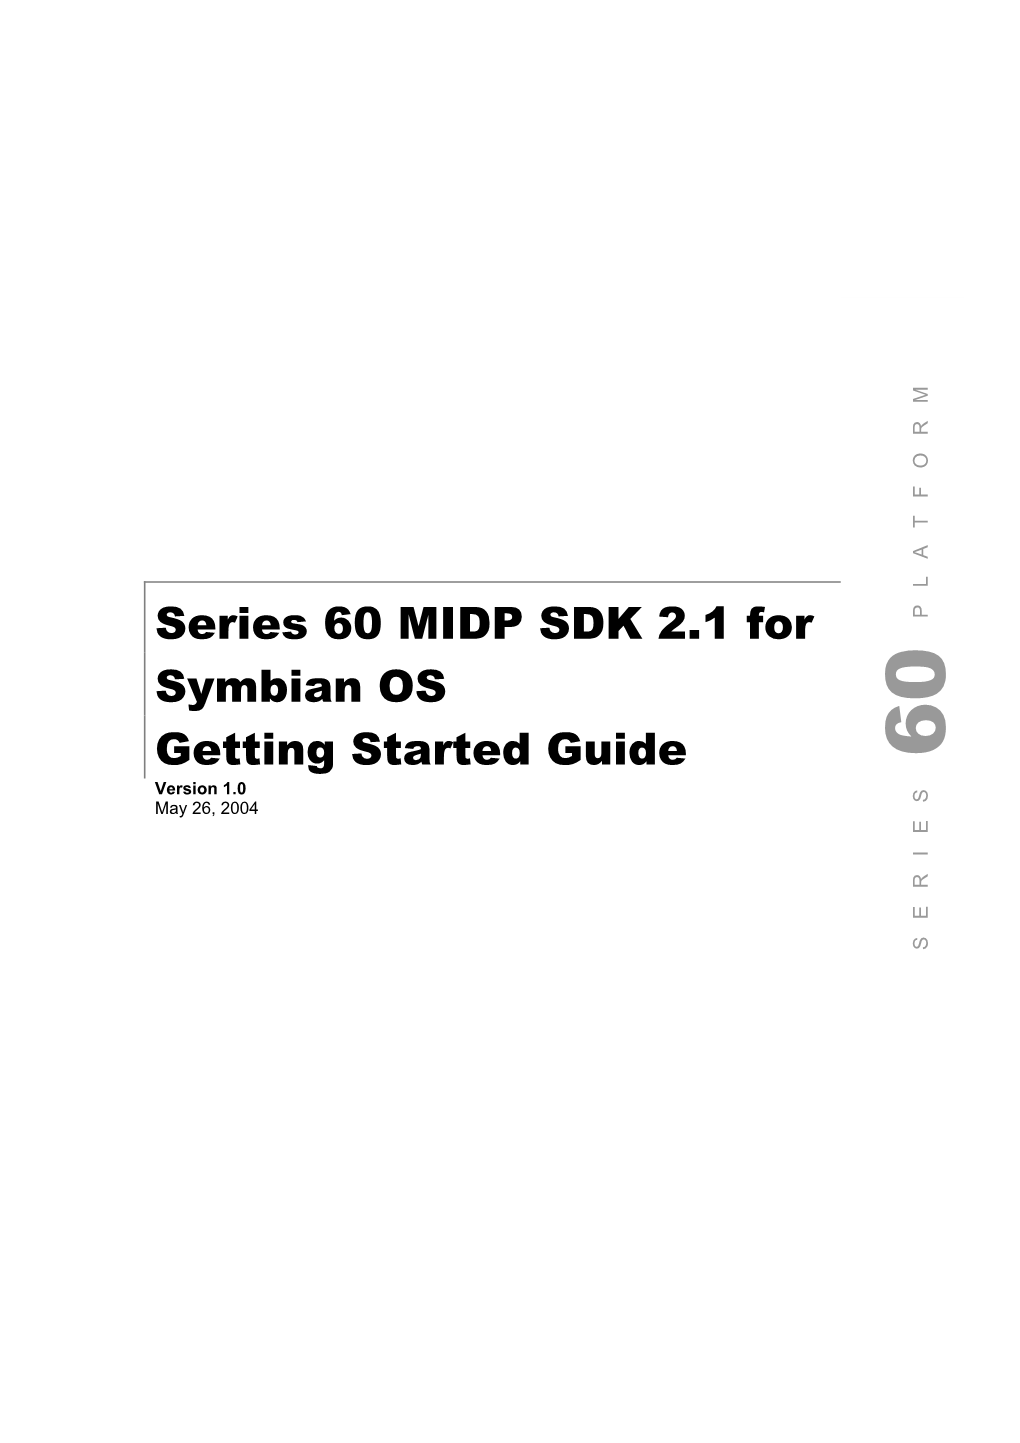 Series 60 MIDP SDK 2.1 for Symbian OS 60